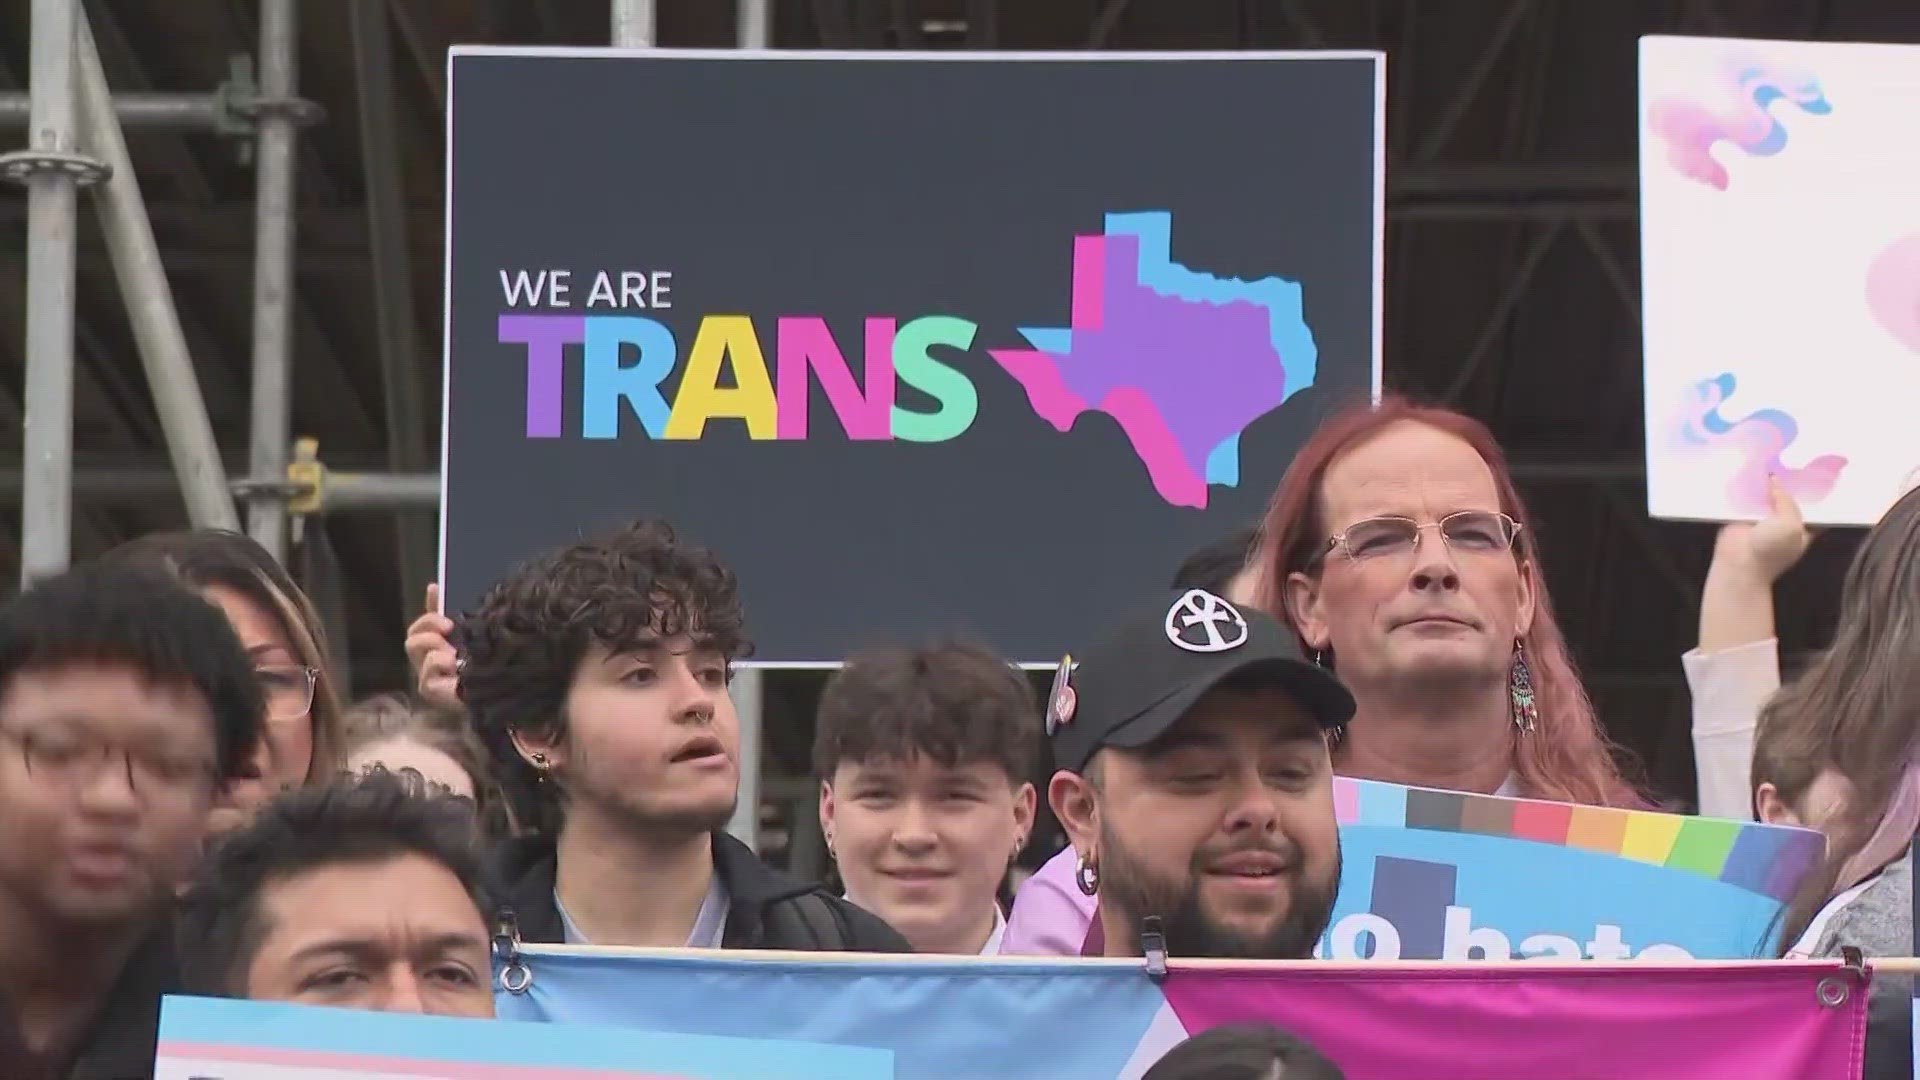 Senate Bill 14 would prohibit Texas doctors from providing care to help transgender youth transition.